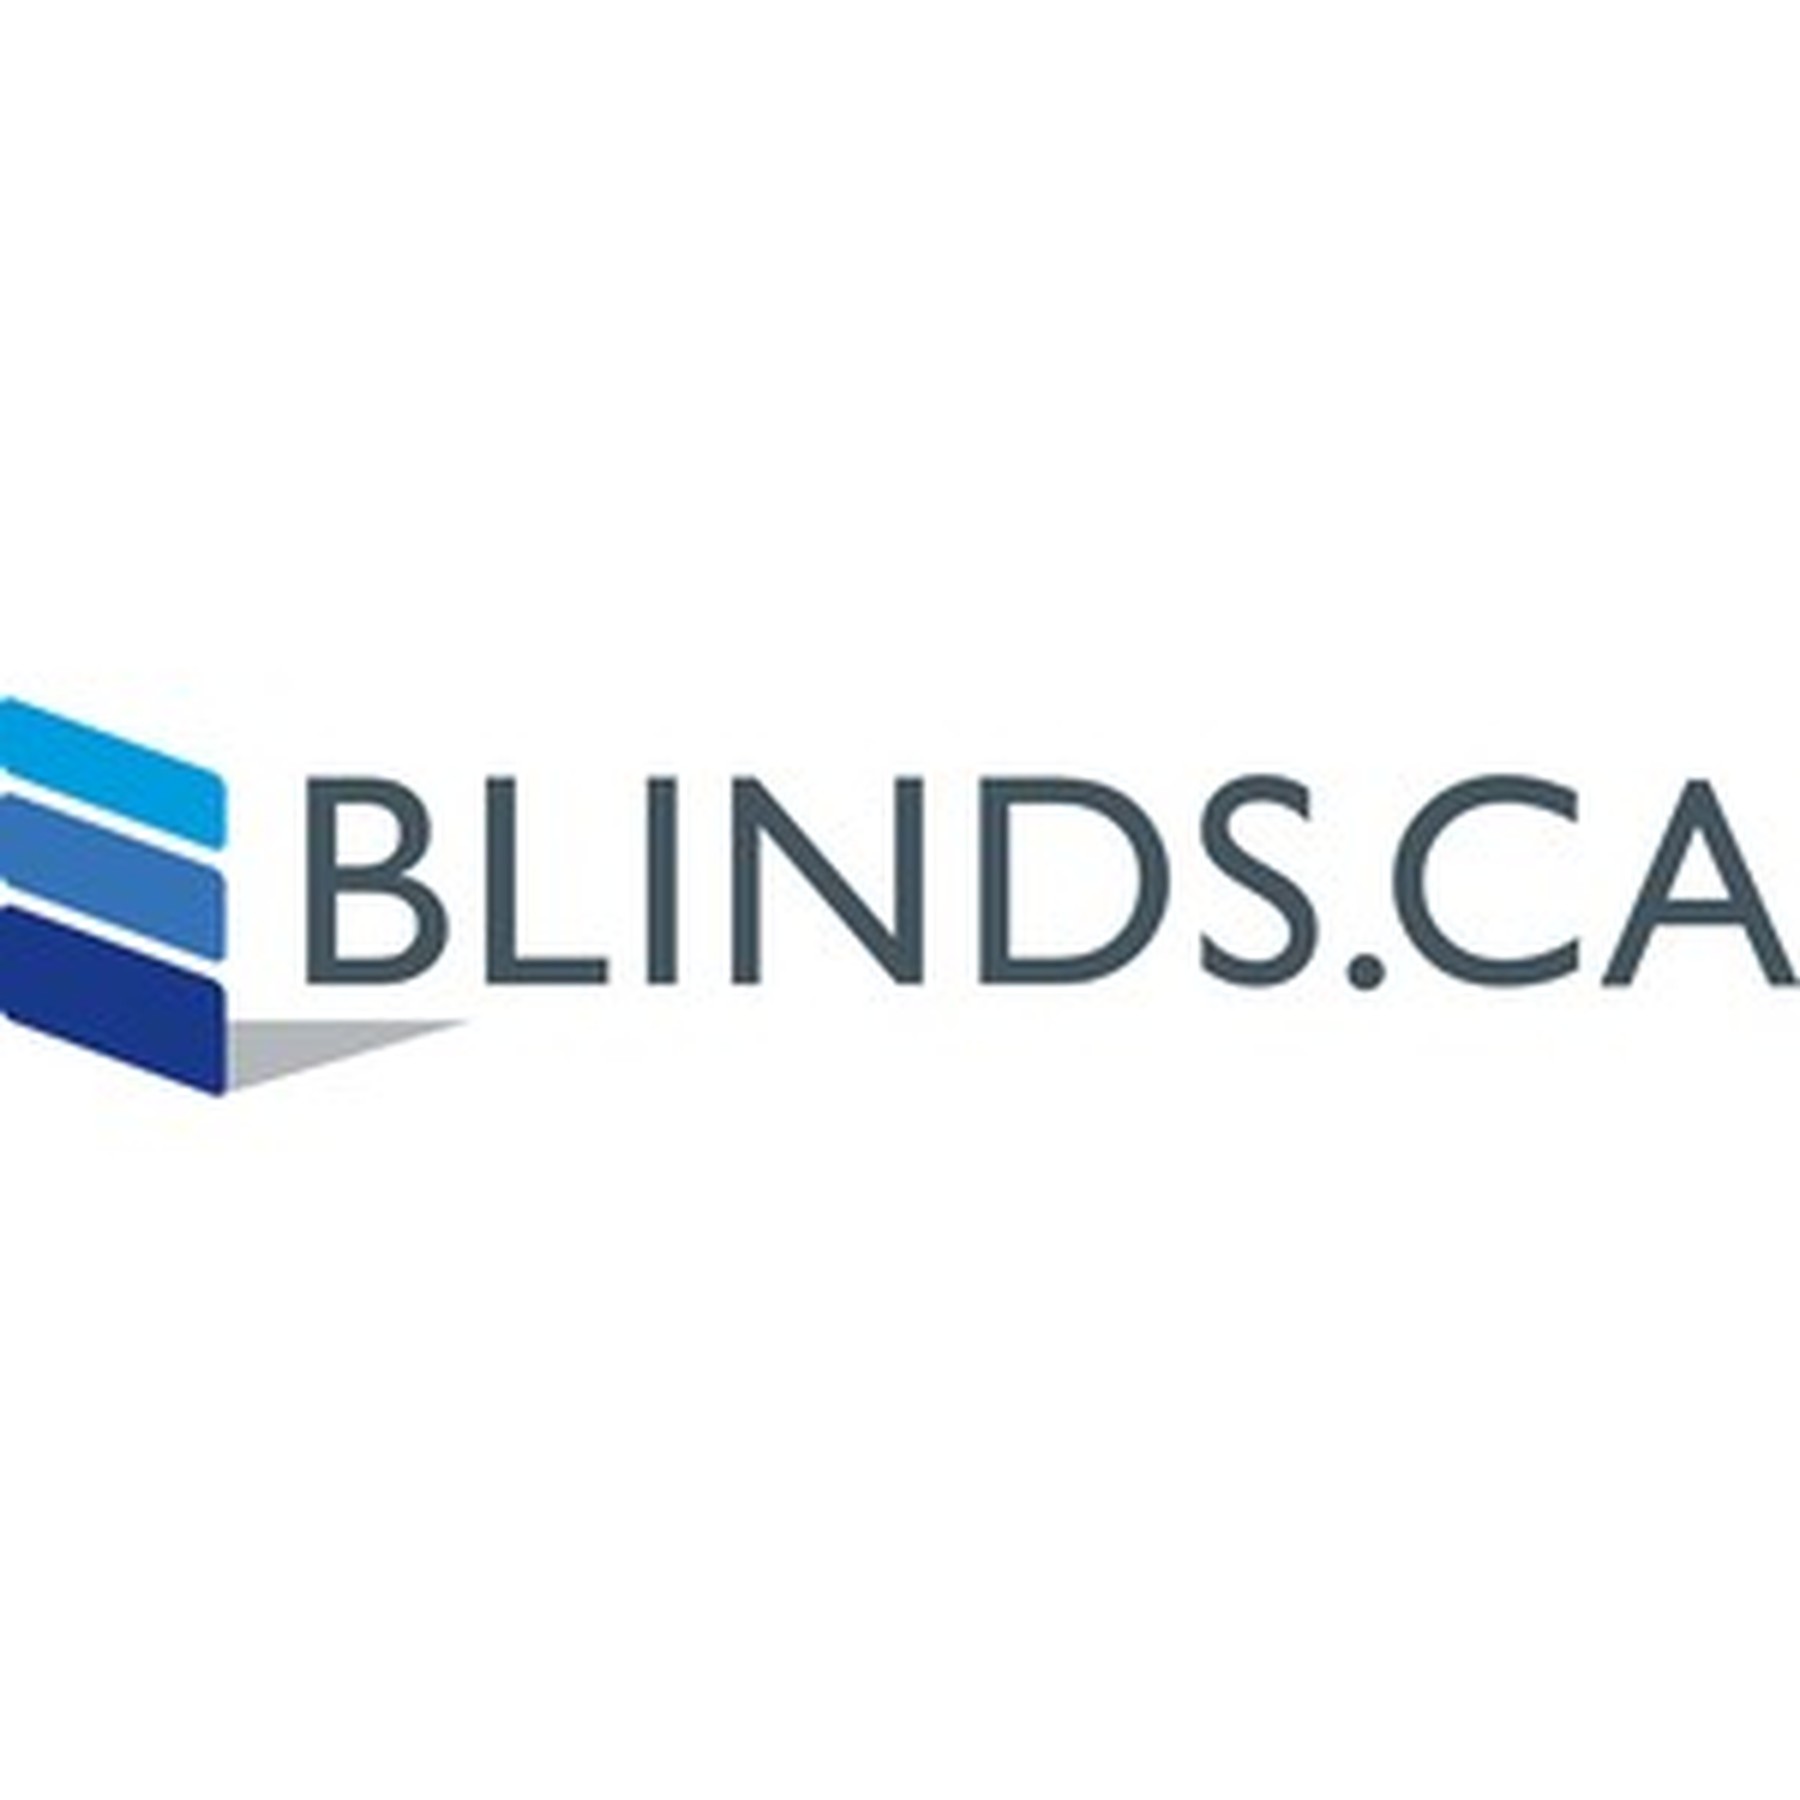 Blinds.ca Promo Codes